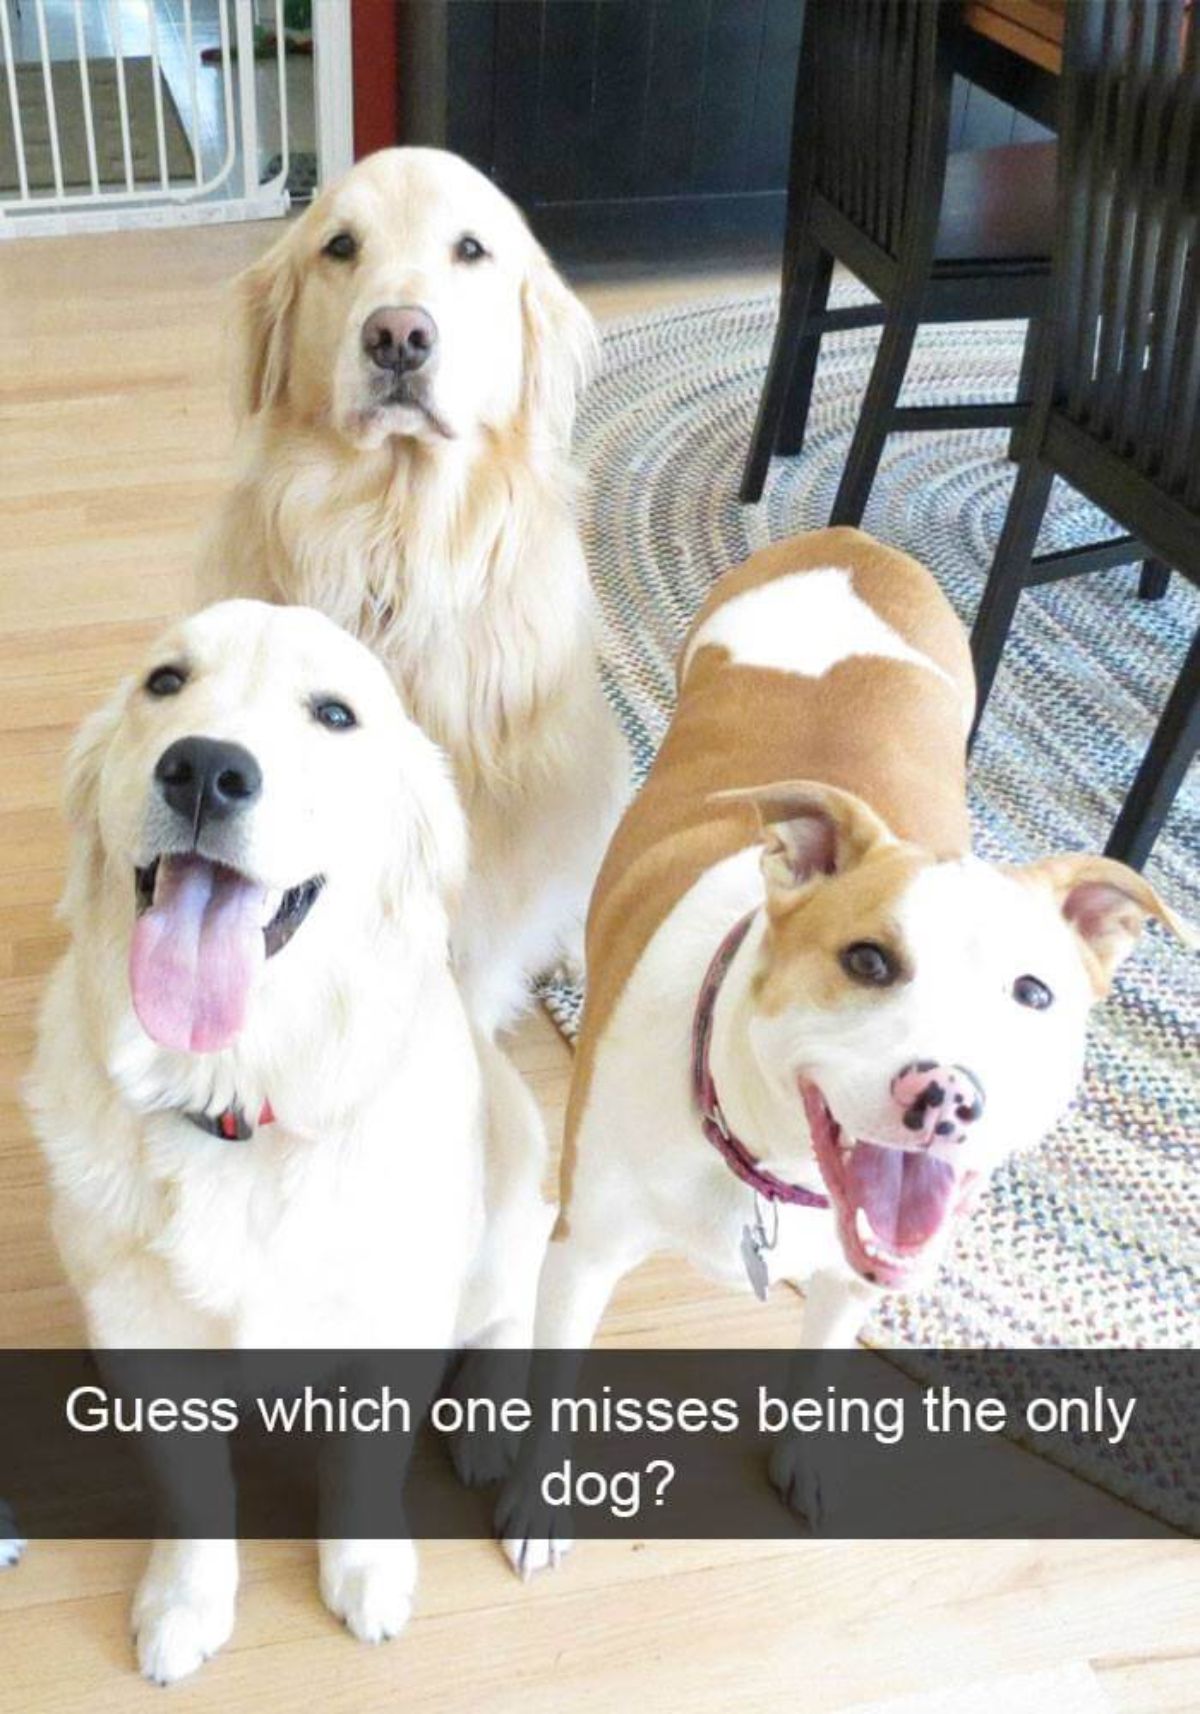 2 golden retrievers and a brown and white dog with 1 golden retriever at the back looking grumpy with a caption saying guess which one misses being the only dog?